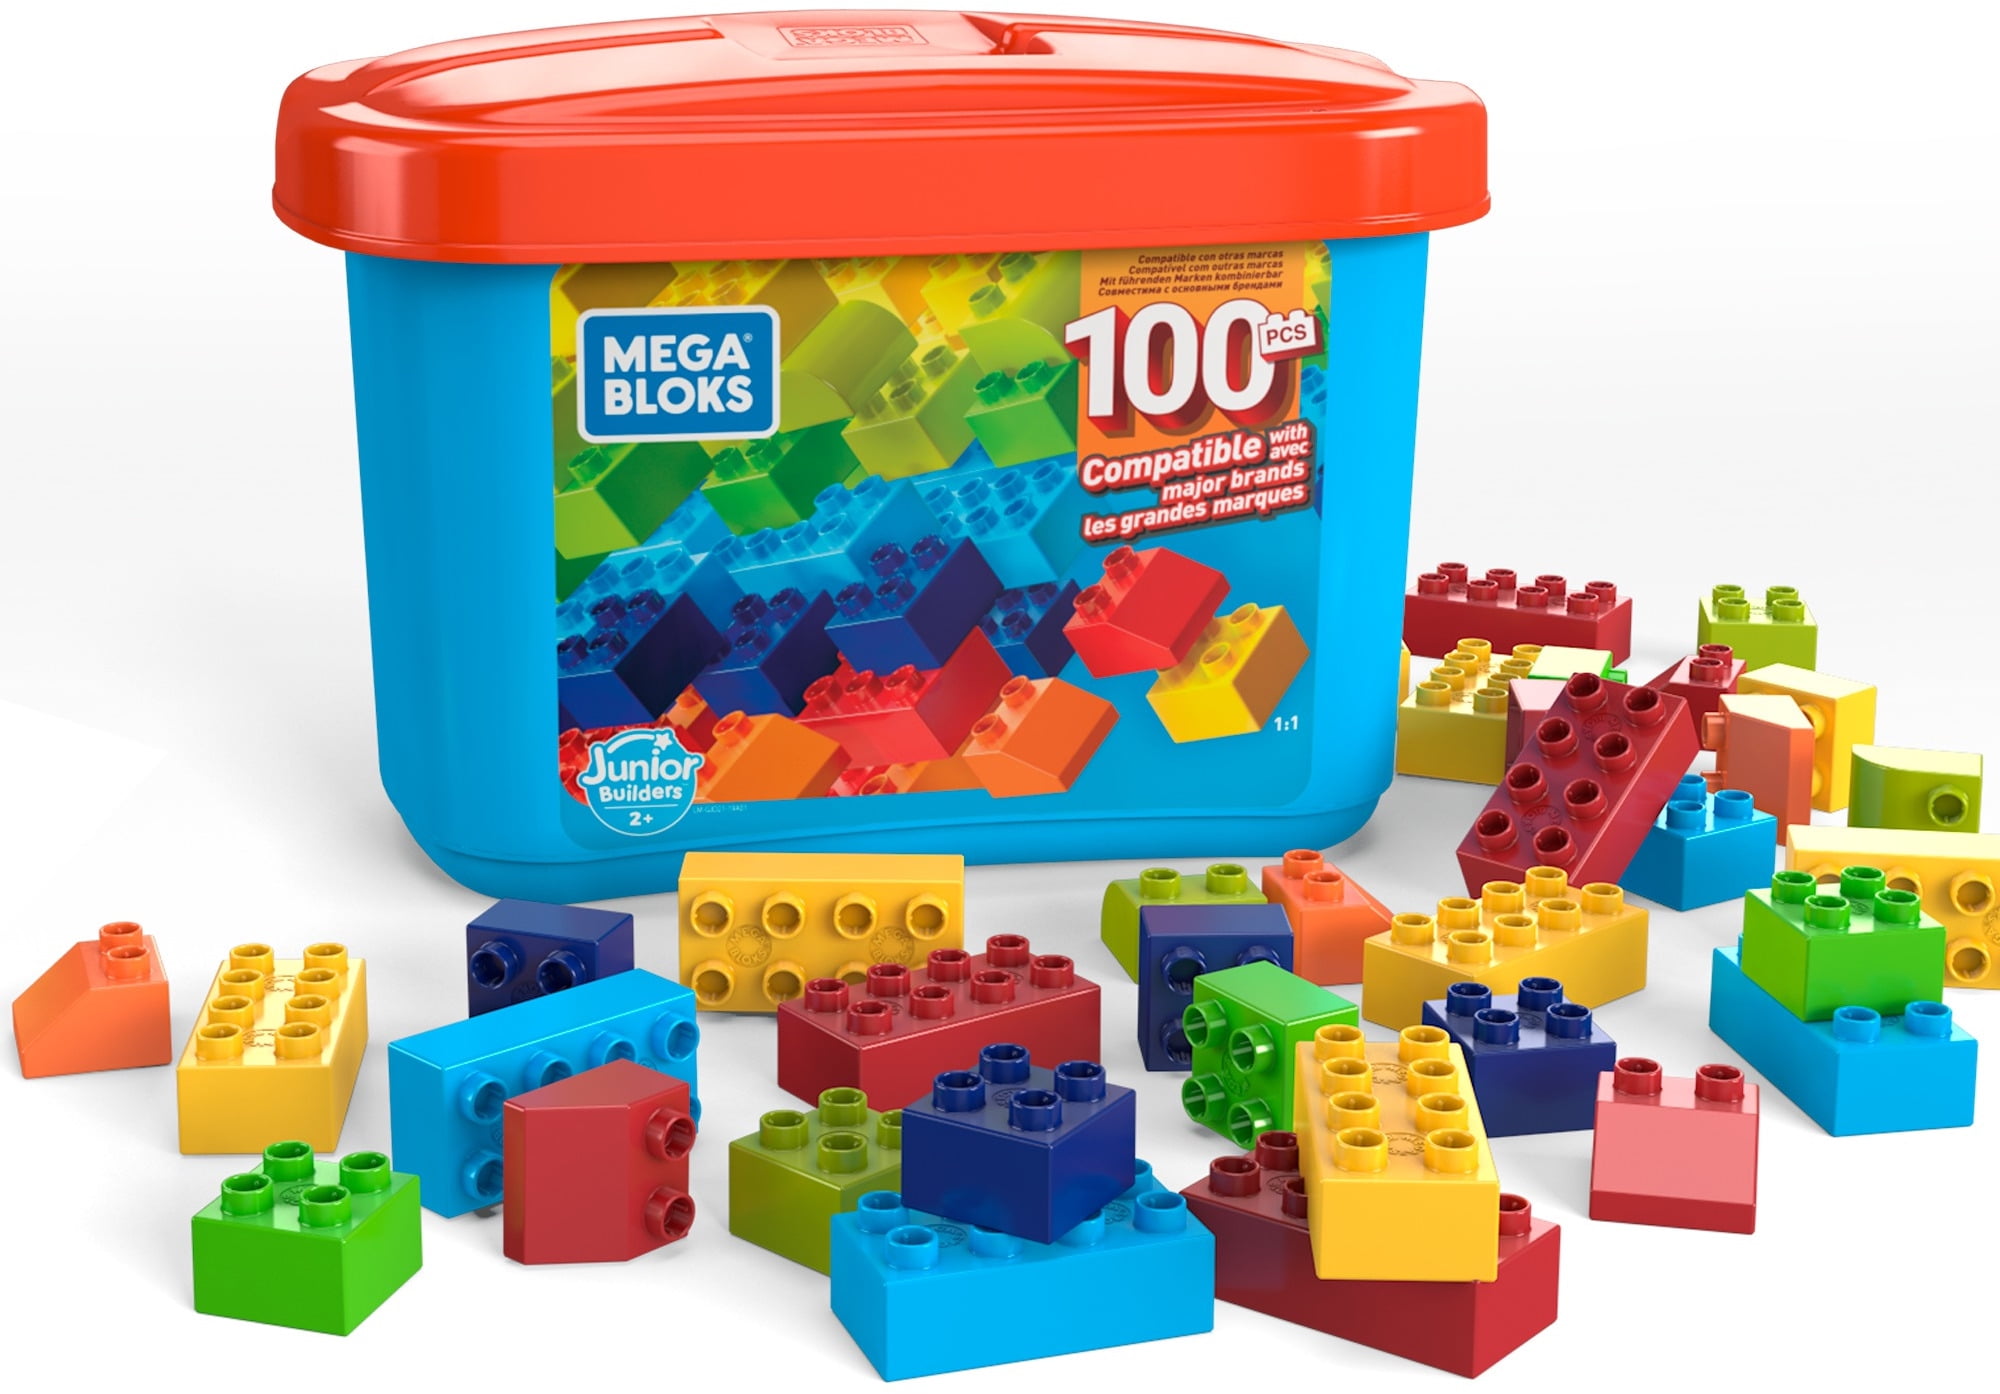 Pieces Mega Bloks Bricks Lot 100 Primary Colors Compatible With LEGO & Tyco 